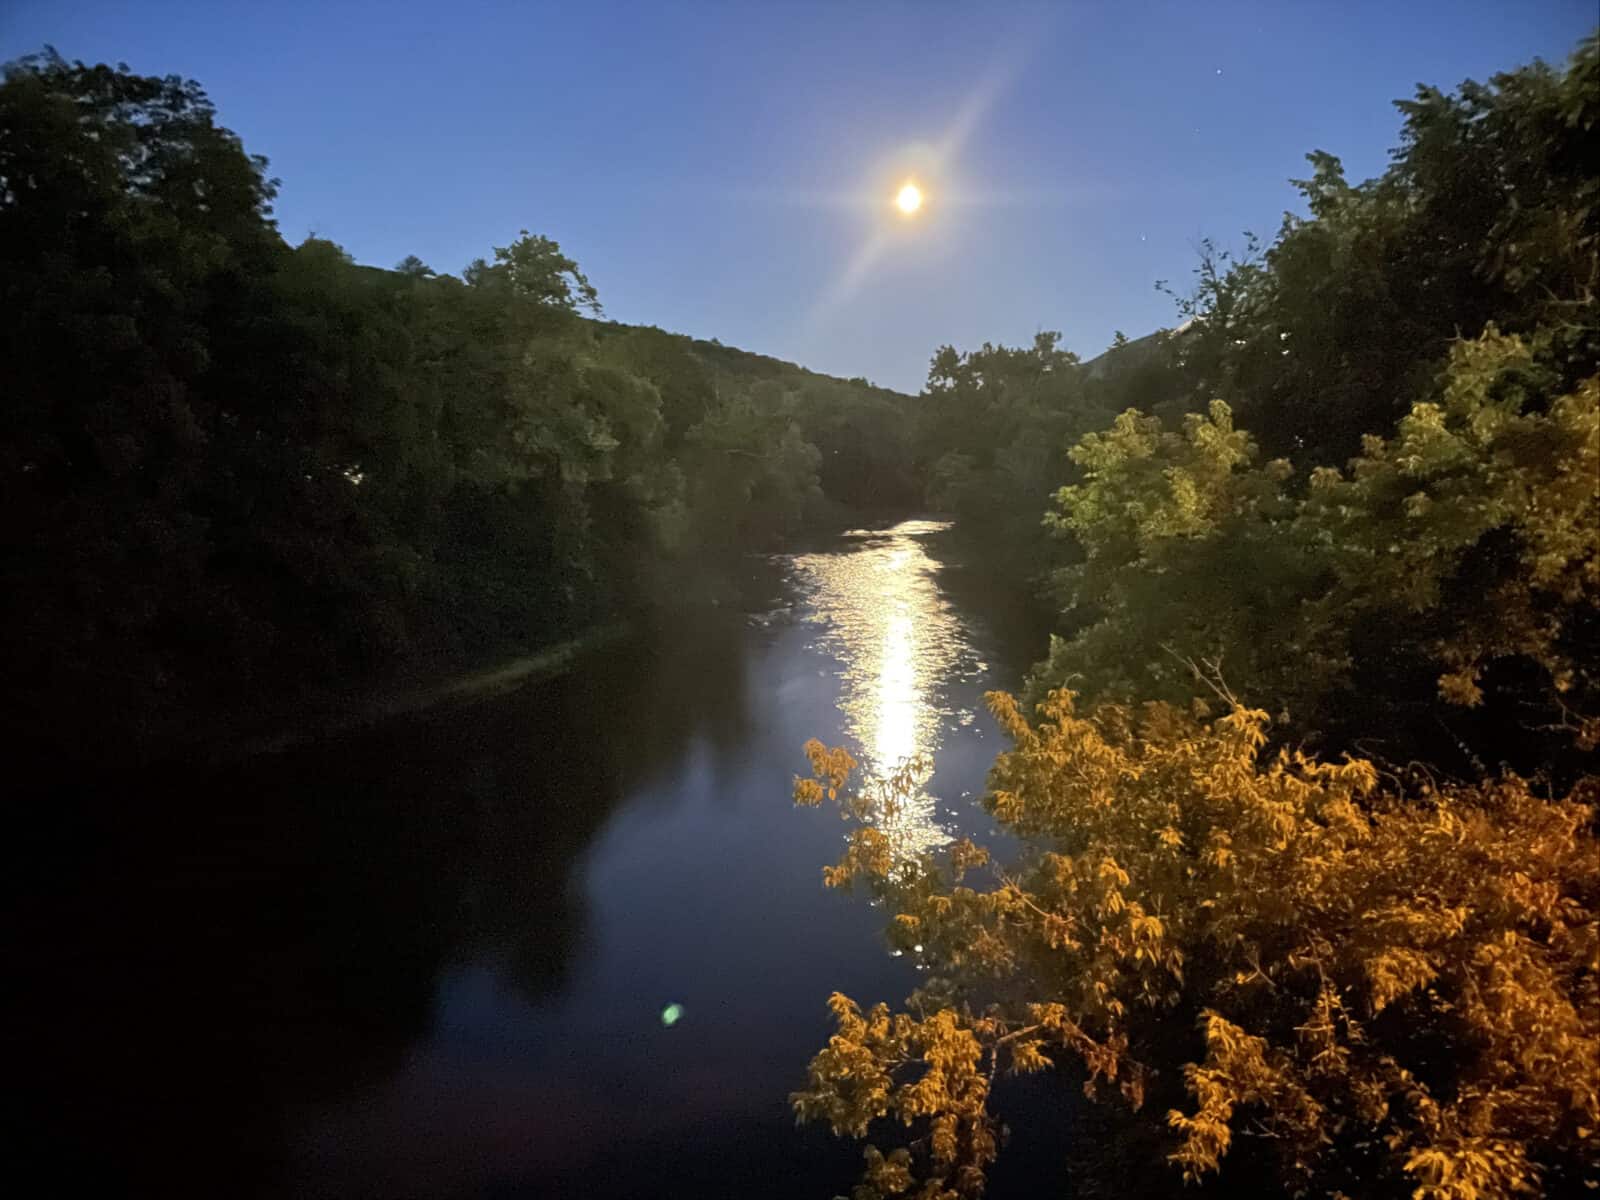 The Hoosic River glows under a full moon on the summer solstice.